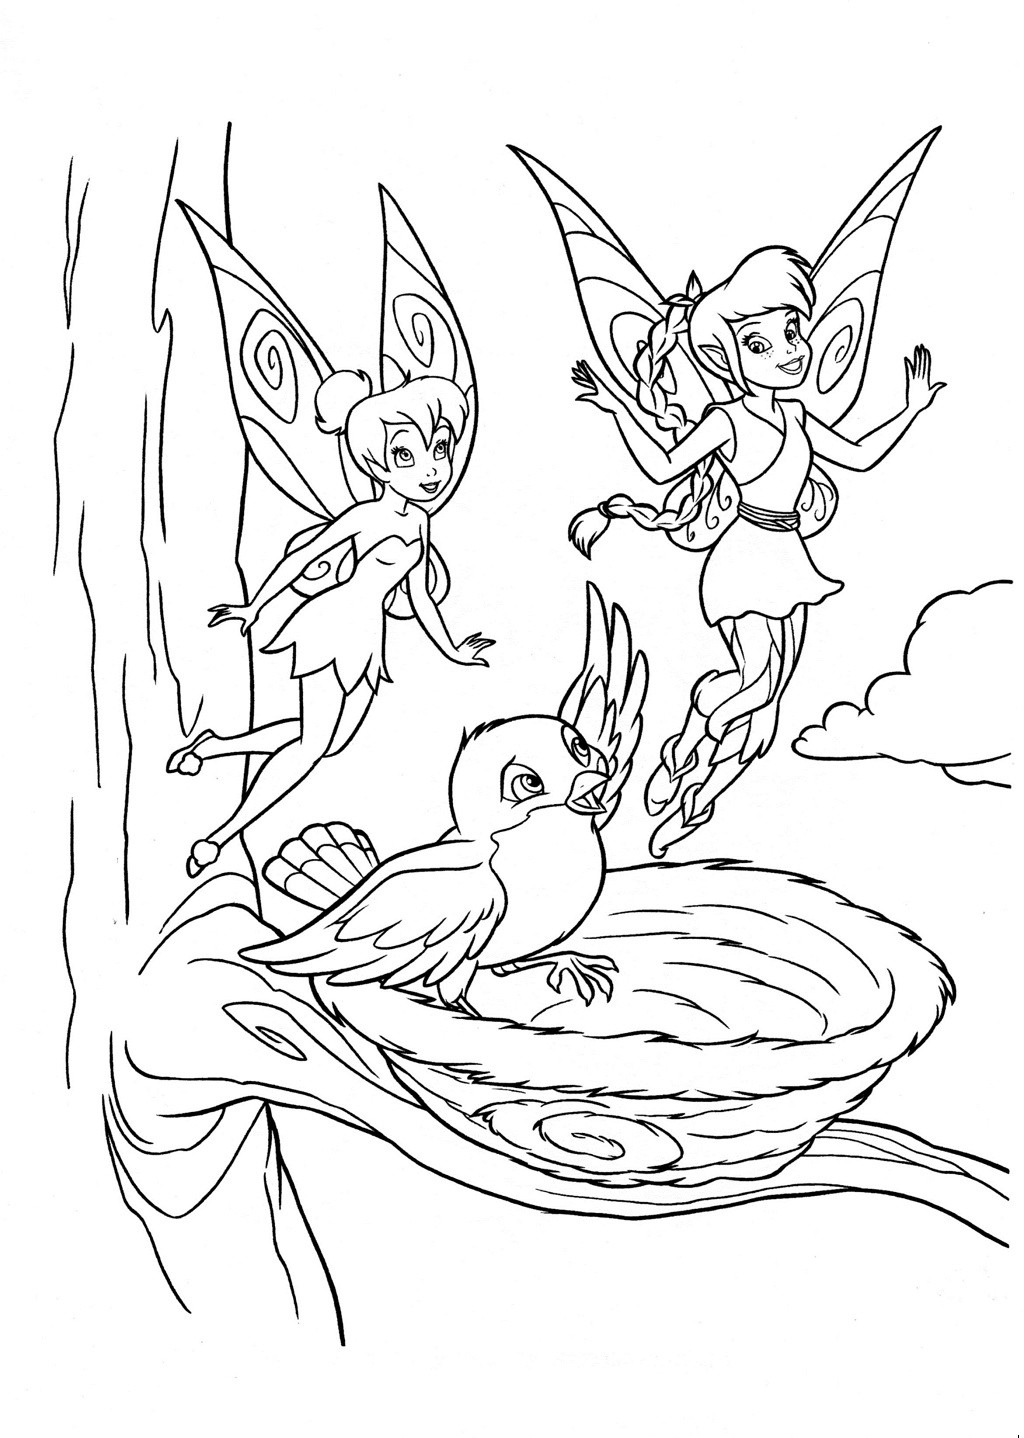 Tinkerbell Coloring Book
 Tinkerbell Fairies Coloring Pages Bestofcoloring